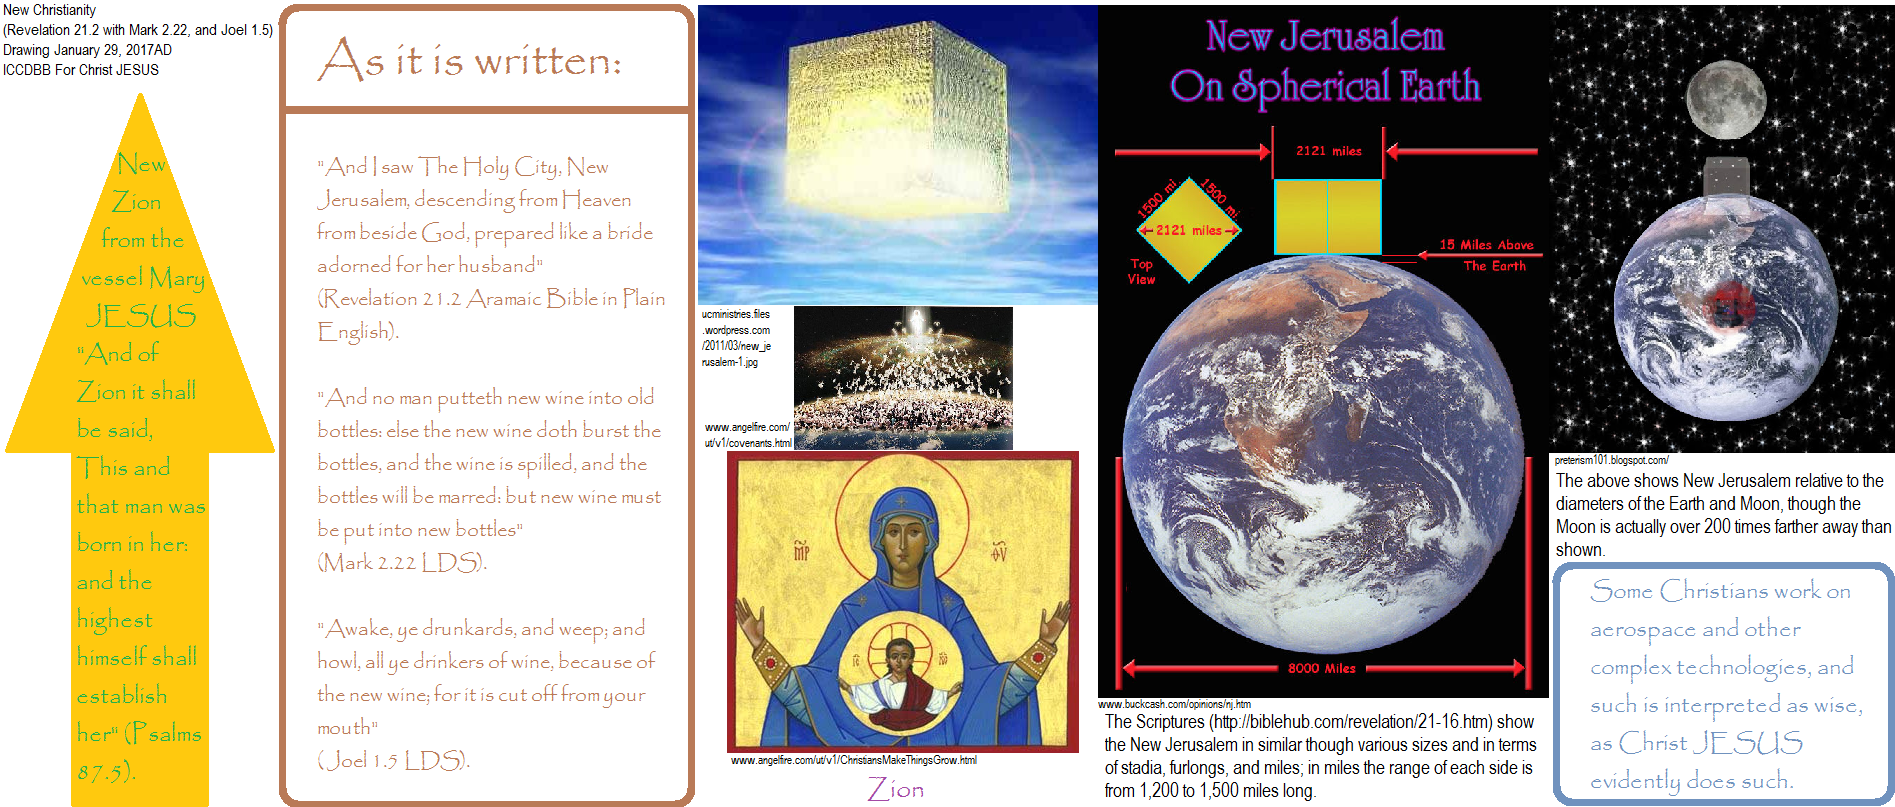 www.angelfire.com/stars/promotions/NewChristianity.html New Christianity revealed something not heard nor sensed previously new discovery bodies rather than love currently, even so love. Zion dimensions length width side height golden cube temple JESUS Christ 144,000 ascending Bible Testament Of Holy GodMath Of Jesus Christ, President Trump as is written in Daniel 2:35, pulse change history, THE BOOK OF MORMON Another Testament of Jesus Christ lds.org biblehub.com faster than the speed of light Holy Physics war and peace parameters. The Character of God. How to overcome Biblical thresholds and firmaments unto new beginnings. Richard Allen to become a great Christian Leader again and greater. Revelation 21, Mark 2, Joel 1, 2 Thessalonians, Exodus 3, Genesis 3, Ether 12, Psalm 50, Daniel 2, Ecclesiastes 2 Corinthians, Deuteronomy 4 ICCDBB, Your Flock for Christ JESUS.